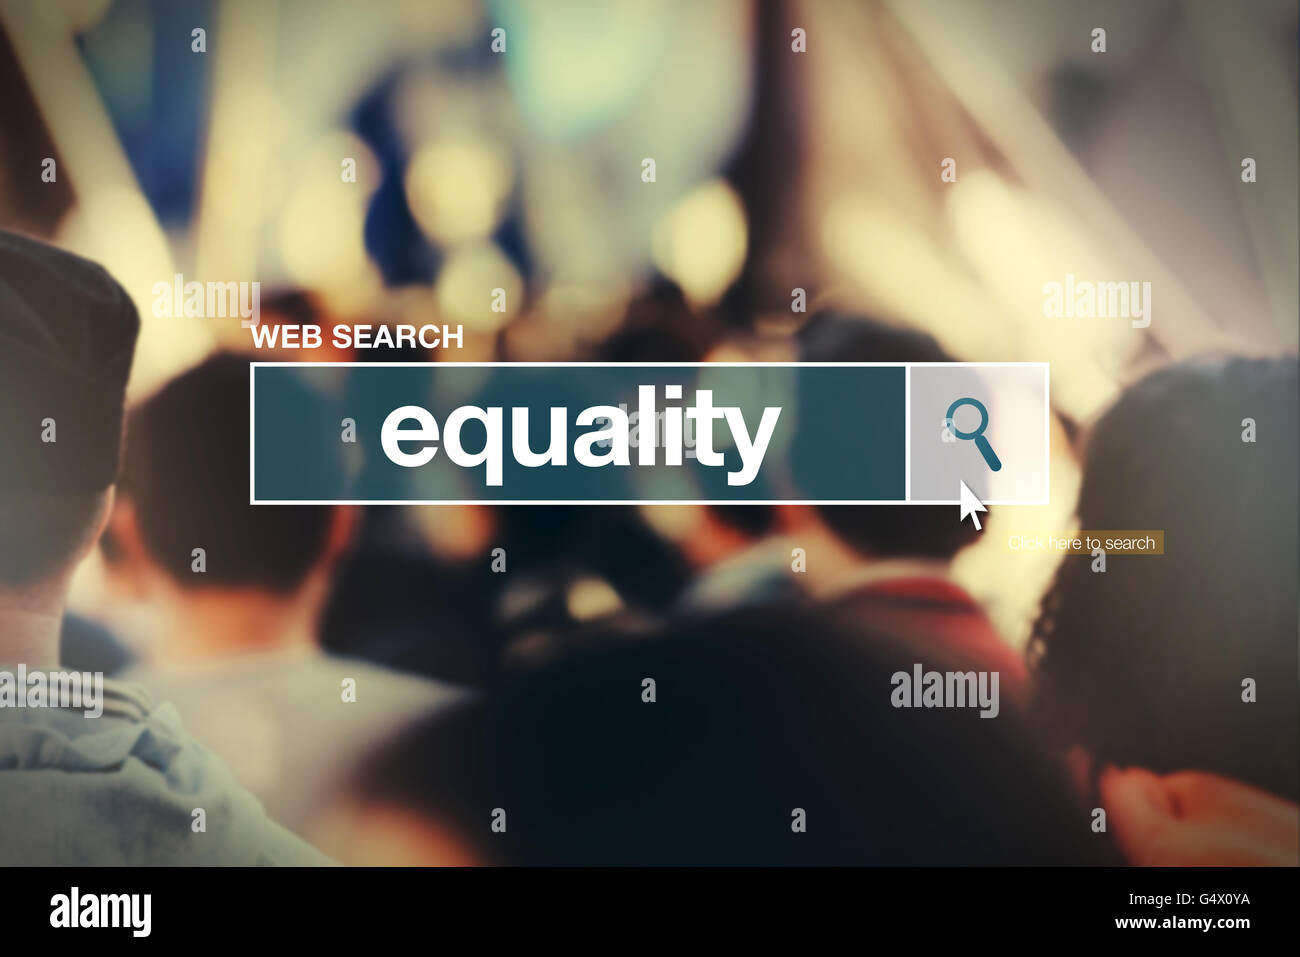 Equality - web search bar glossary term  in internet glossary. Stock Photo